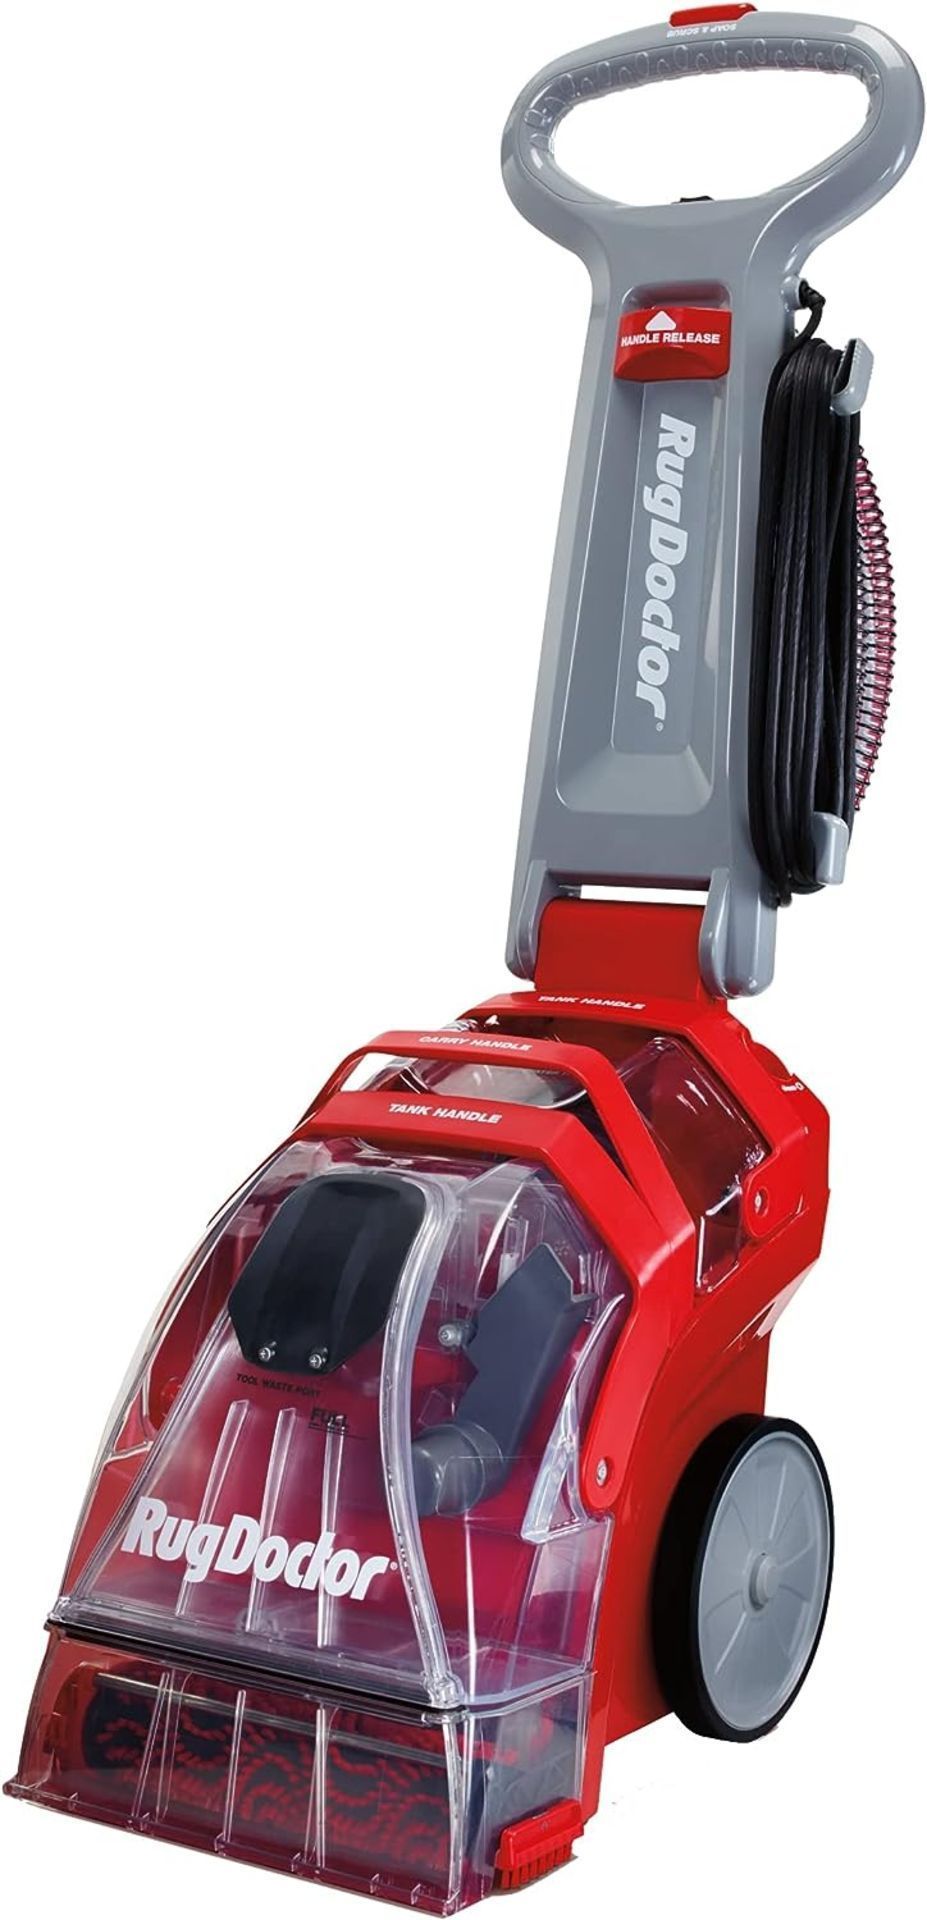 Brand New Rug Doctor 1093170 R10-9 Deep Carpet Cleaner, Red with 6l Cleaning Solution RRP £299,